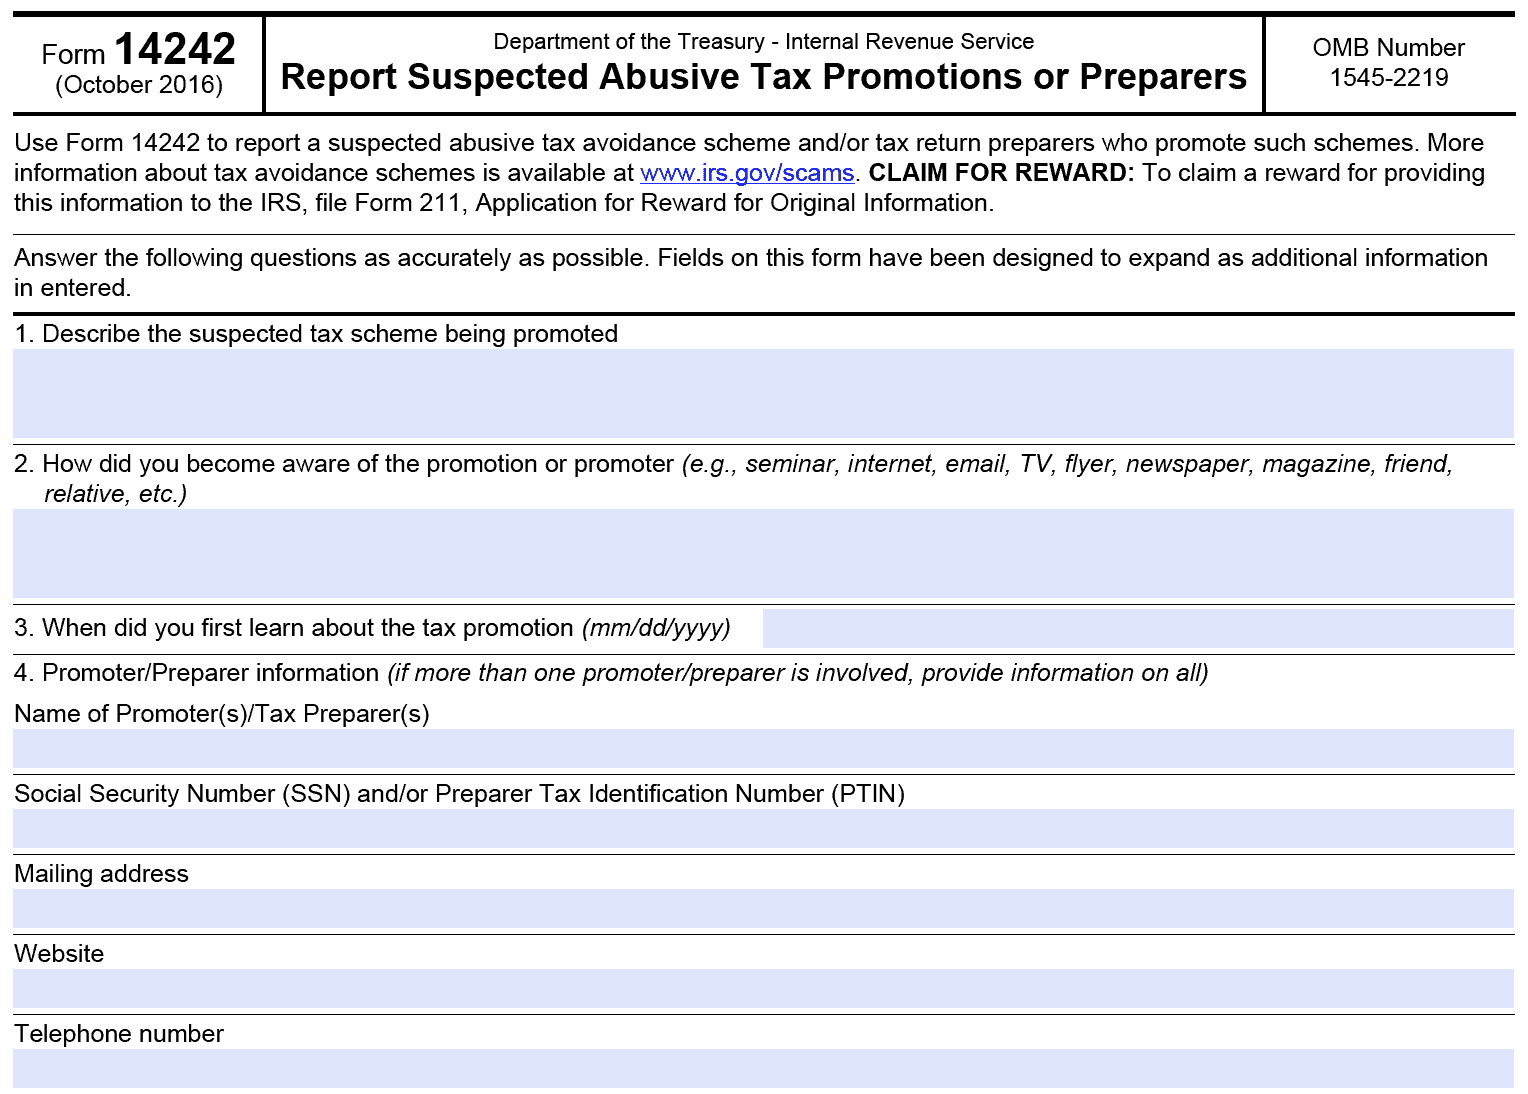 irs form 14242, questions 1-4